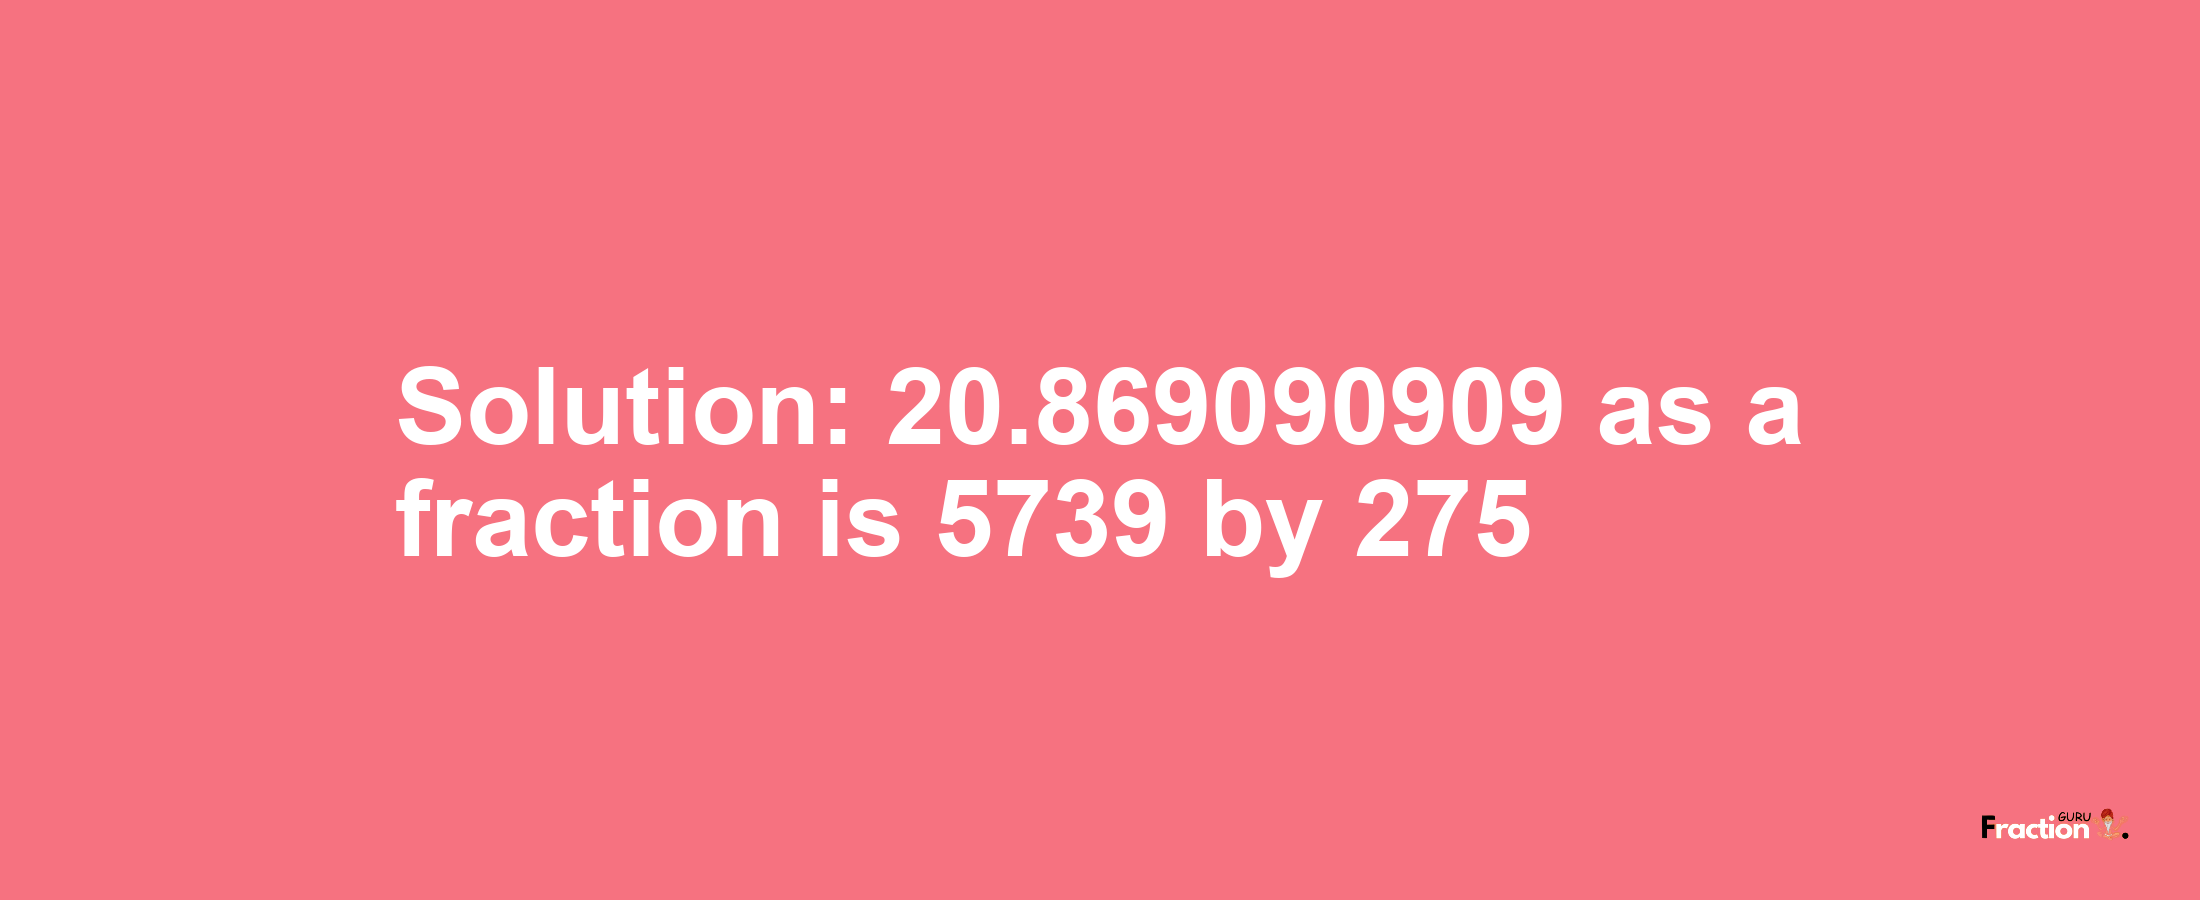 Solution:20.869090909 as a fraction is 5739/275